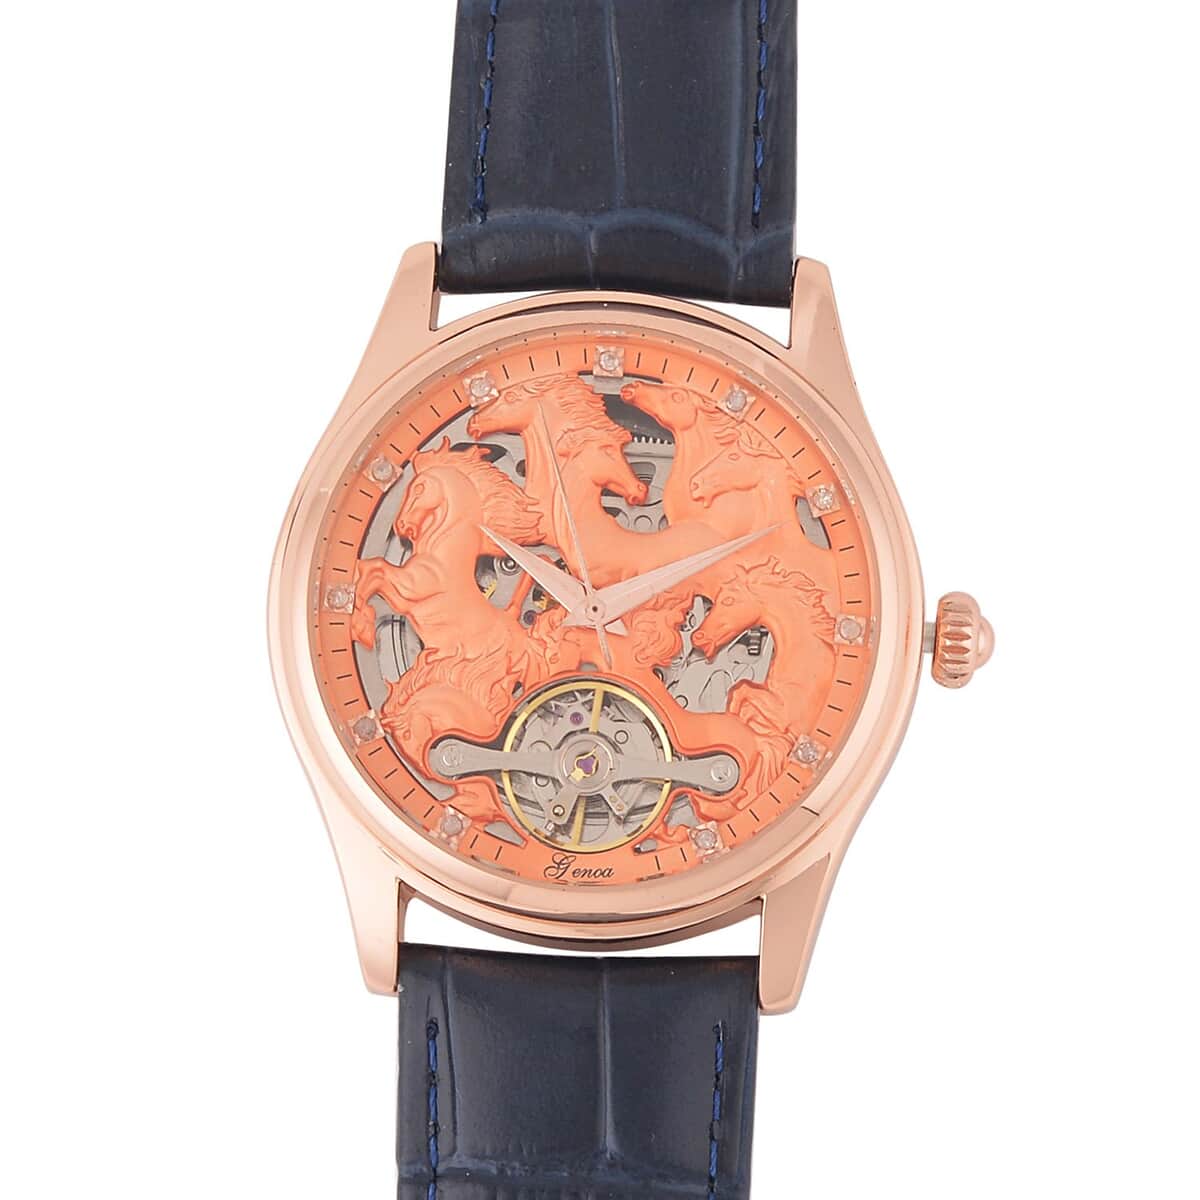 GENOA White Diamond Automatic Mechanical Movement Horse Pattern Watch in Rosetone with Navy Blue Leather Strap (44.20mm) (7.00-9.00 Inches) 0.10 ctw image number 3